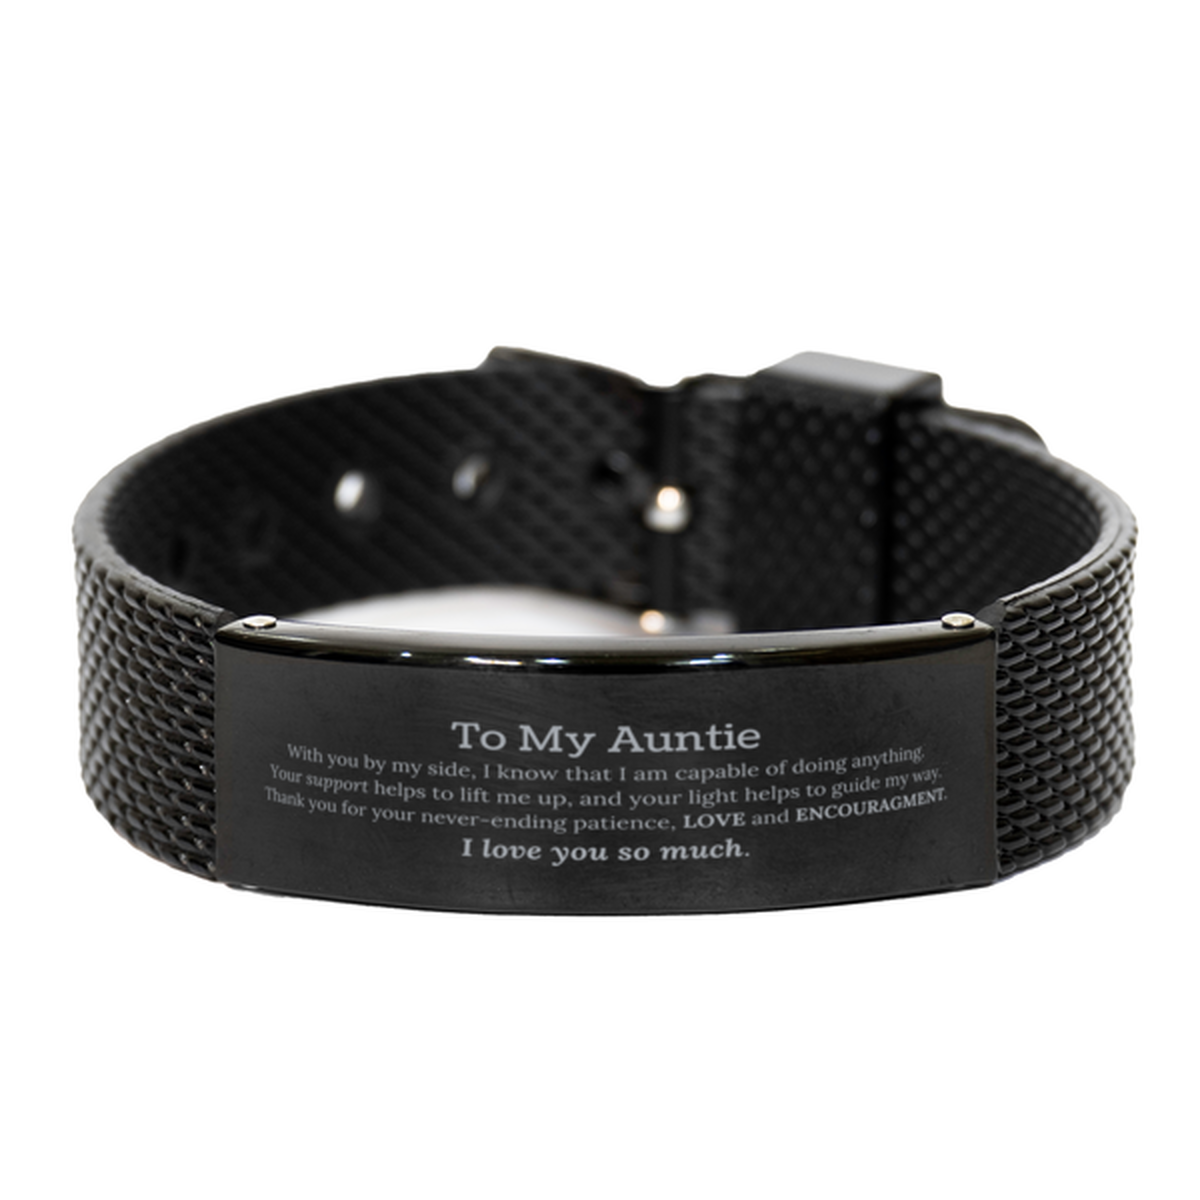 Appreciation Auntie Black Shark Mesh Bracelet Gifts, To My Auntie Birthday Christmas Wedding Keepsake Gifts for Auntie With you by my side, I know that I am capable of doing anything. I love you so much